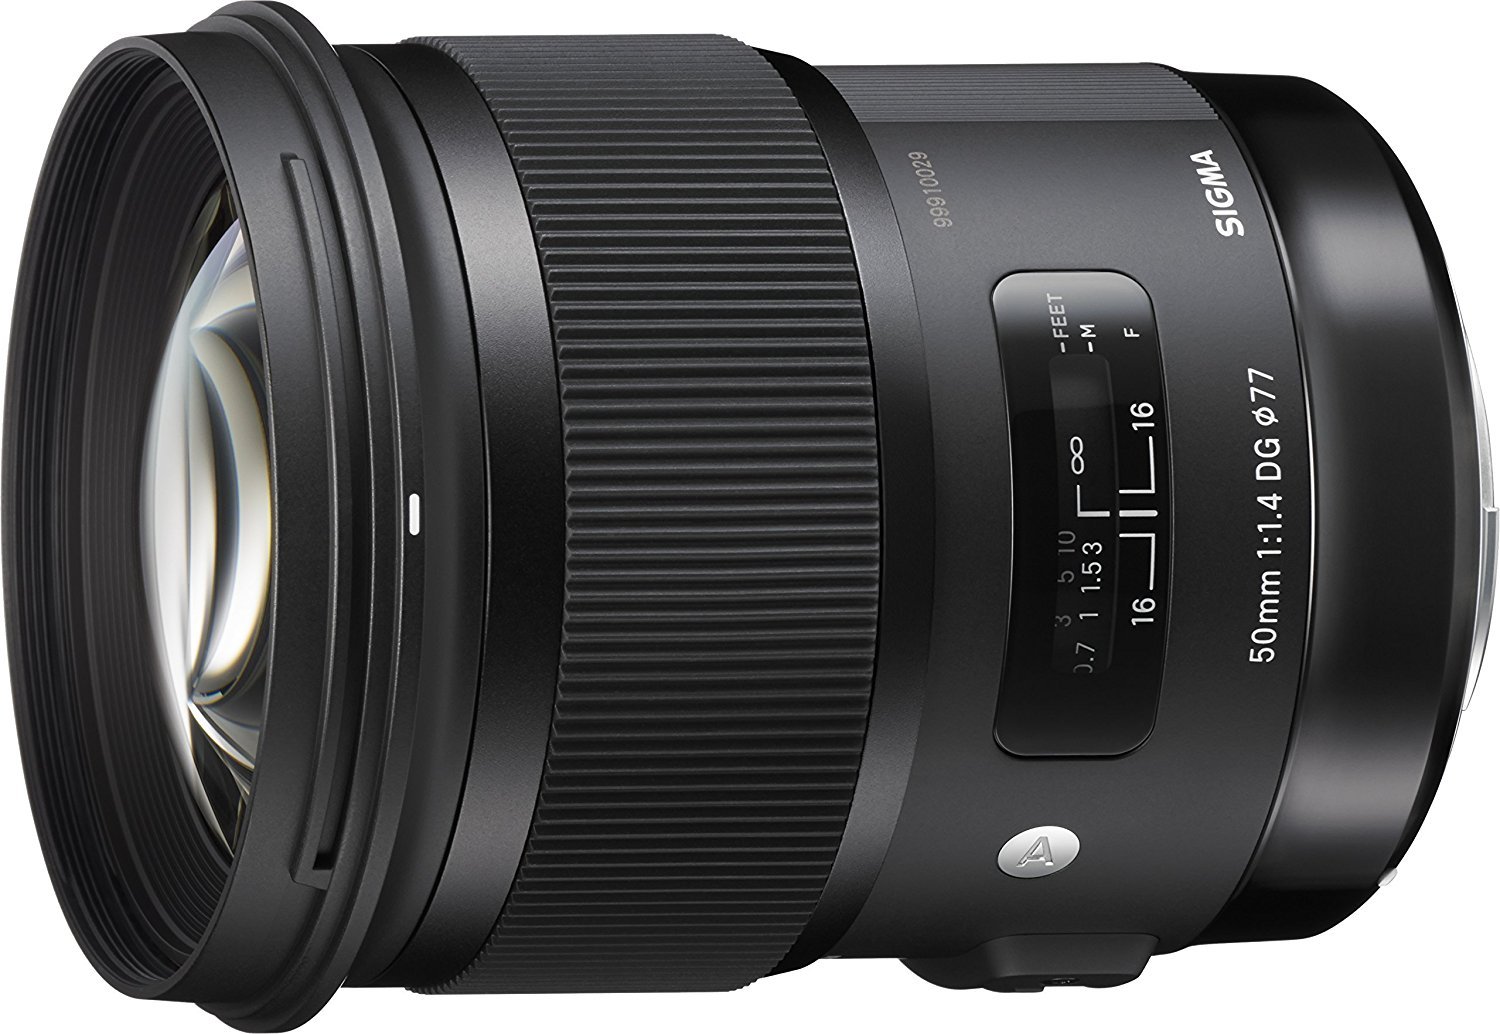 The Sharpest Canon and Nikon Lenses on a Budget